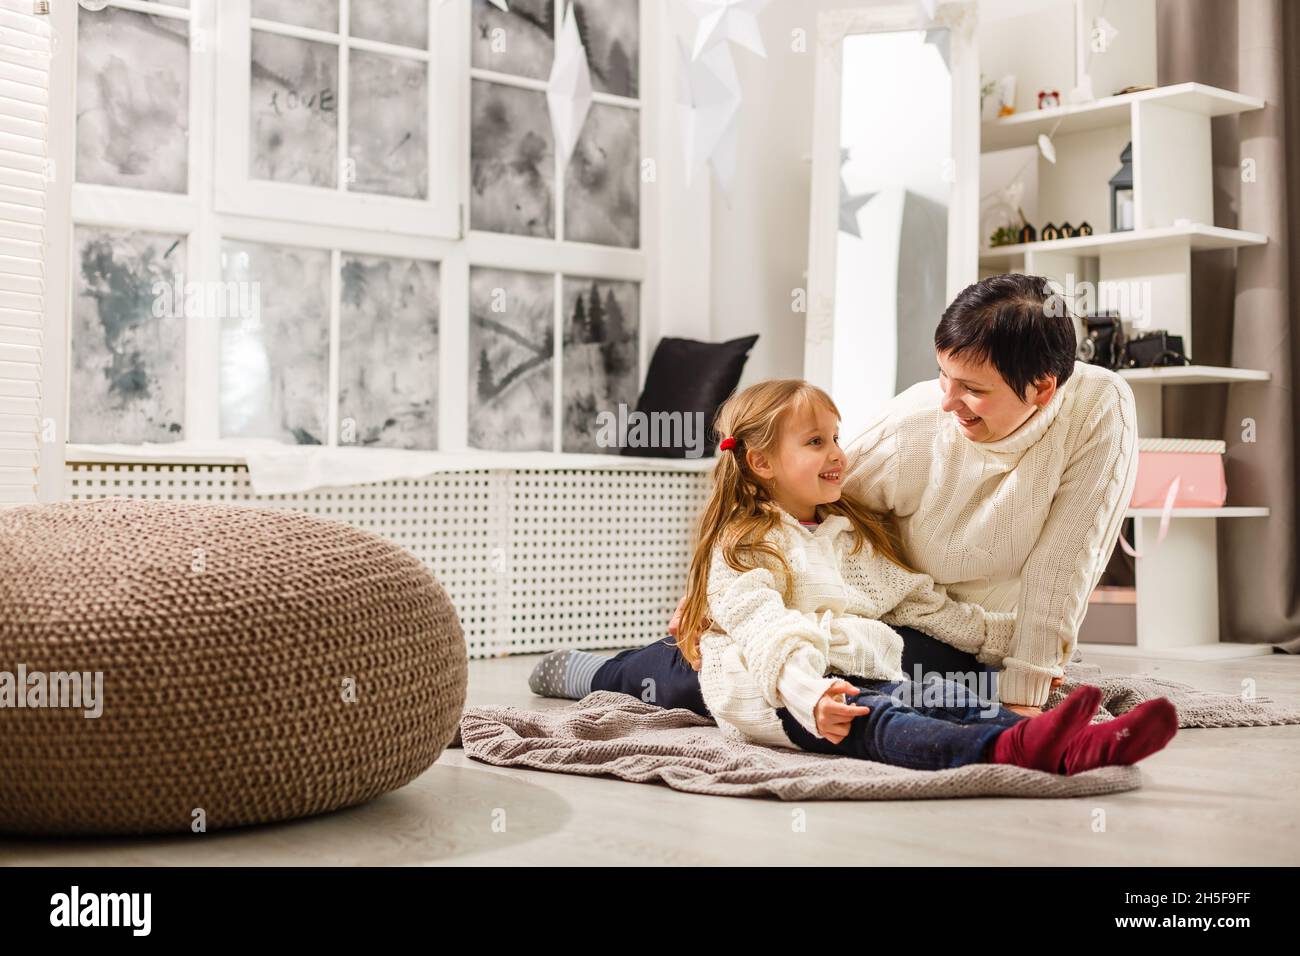 Mother and daughter unwrapping a present lying on the floor in the living room Stock Photo